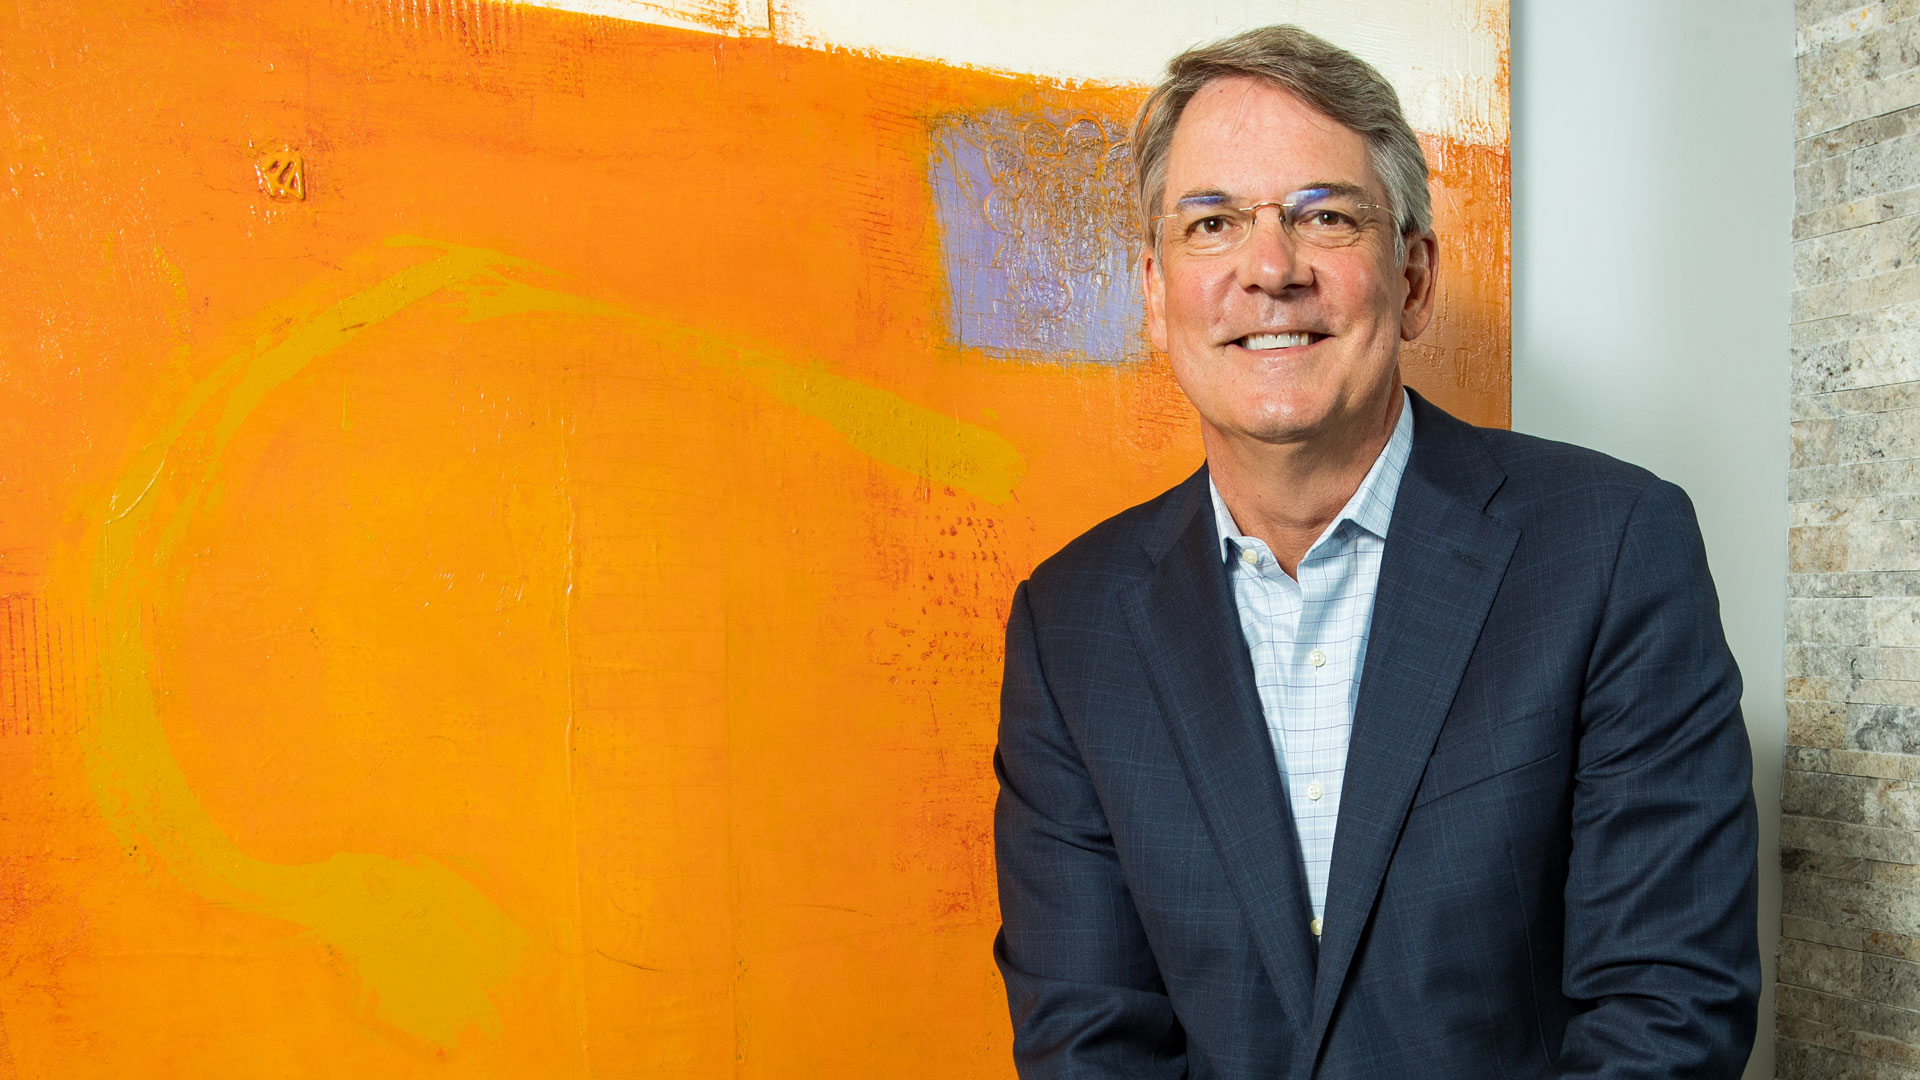 Chris Koch poses in front of an orange background at his office.